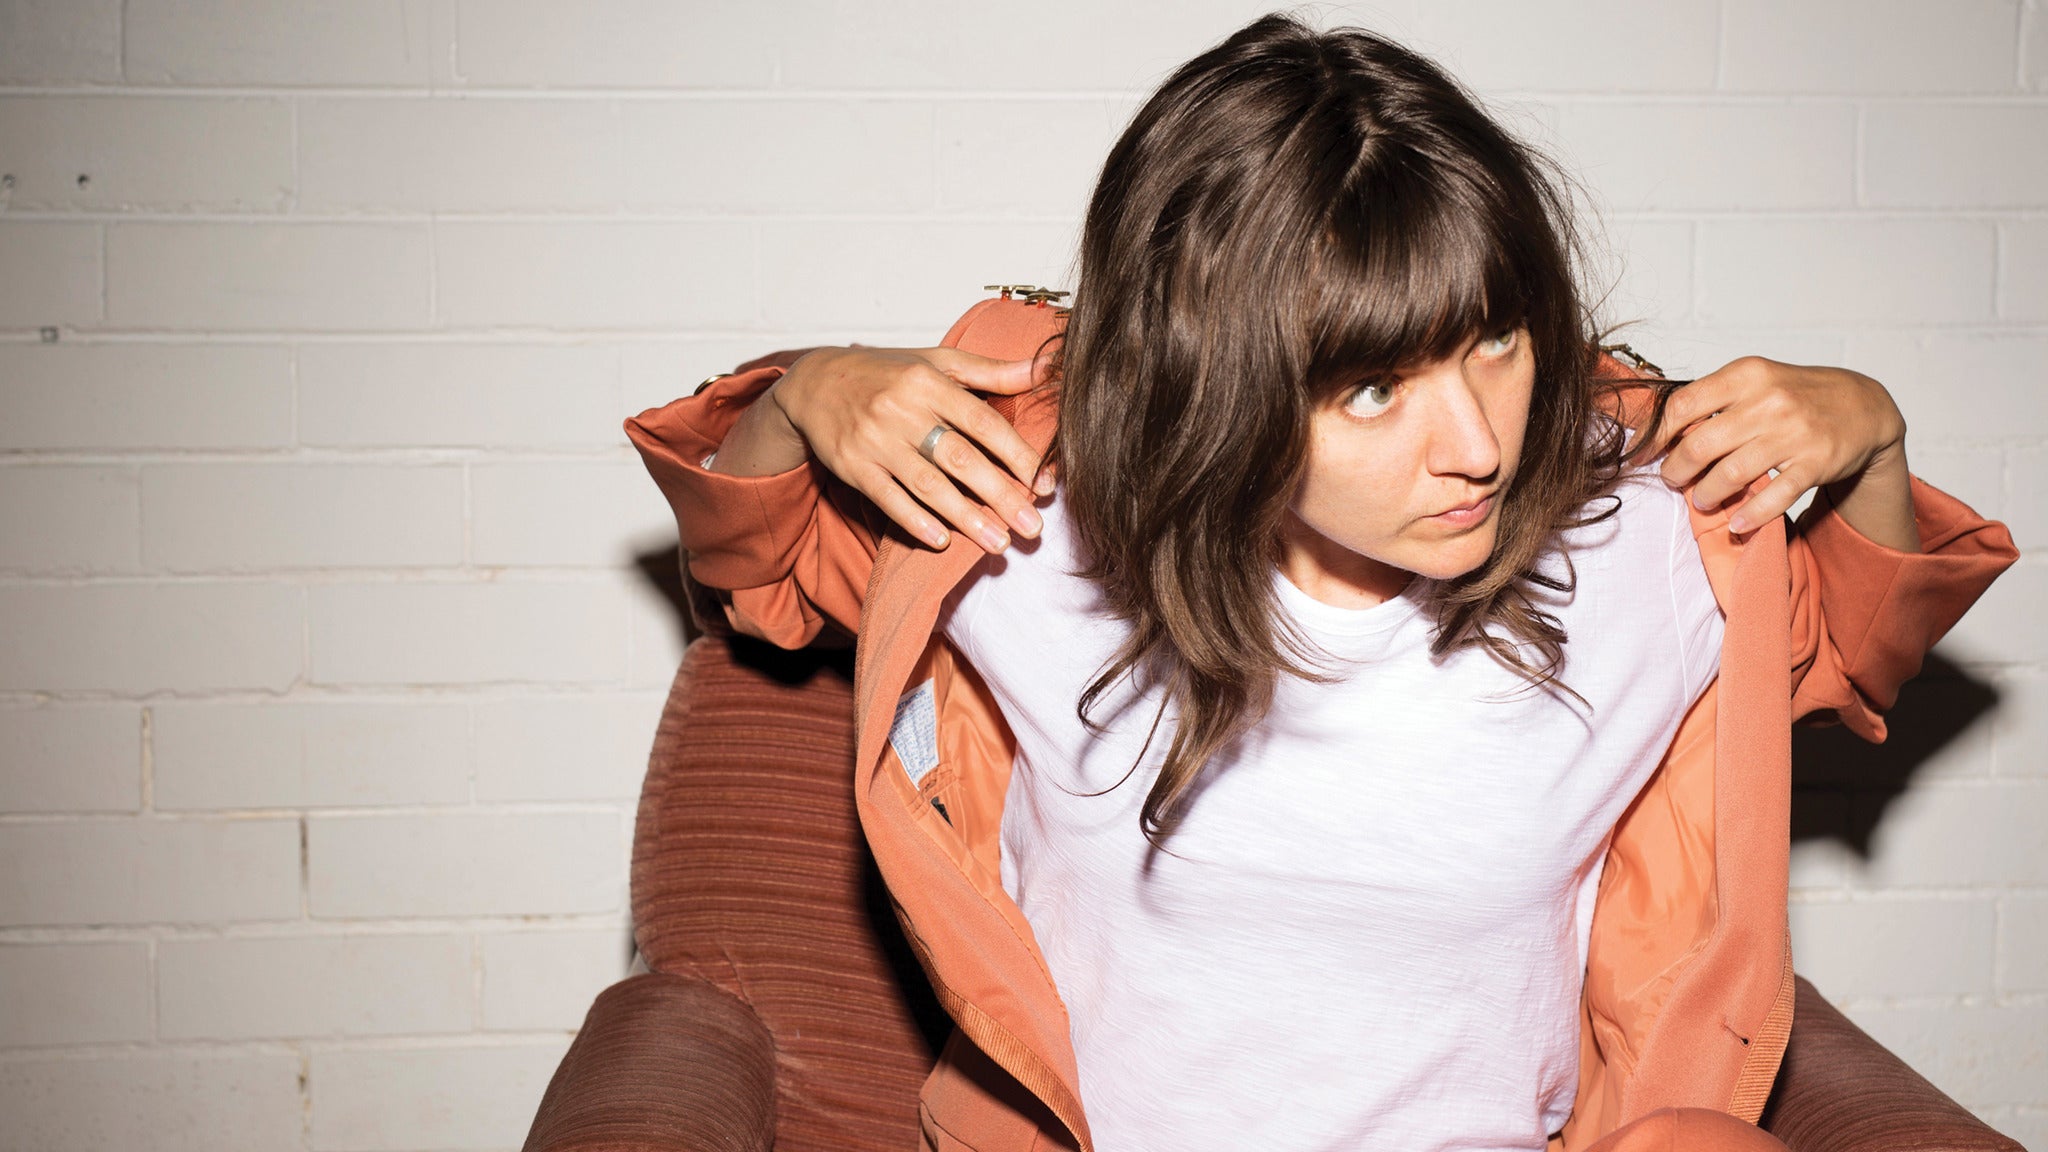 Courtney Barnett in Toronto promo photo for Collective Concerts presale offer code